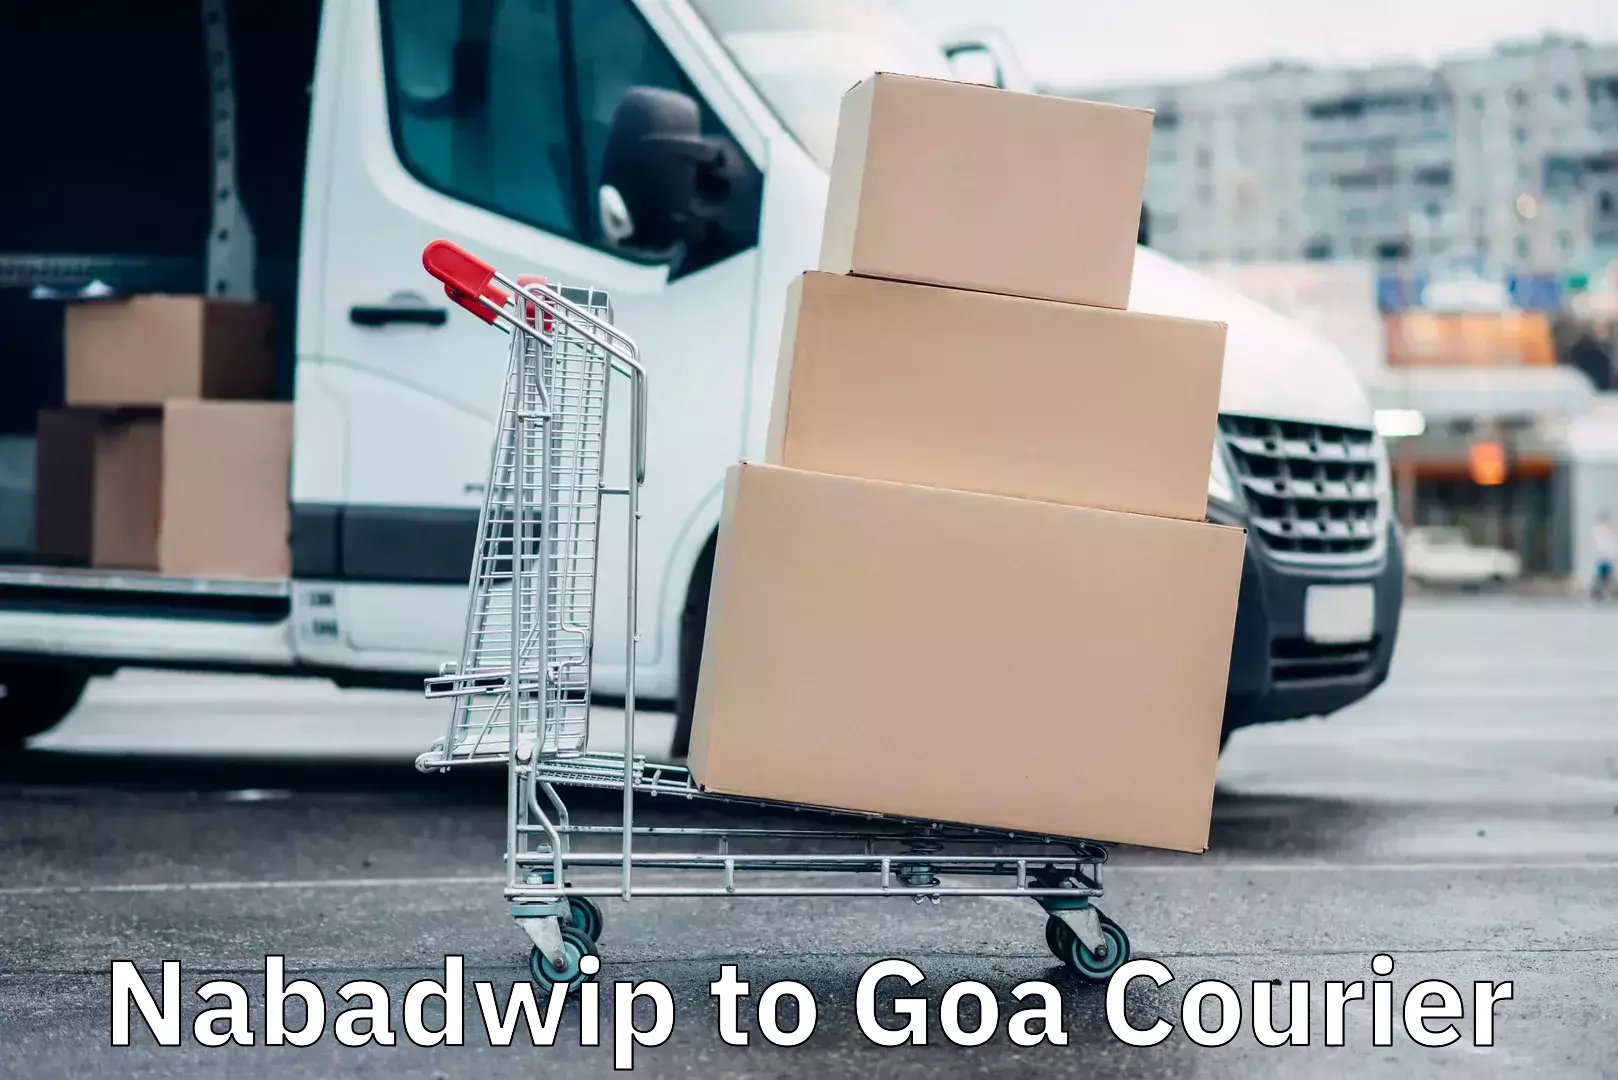 Customer-oriented courier services Nabadwip to Goa